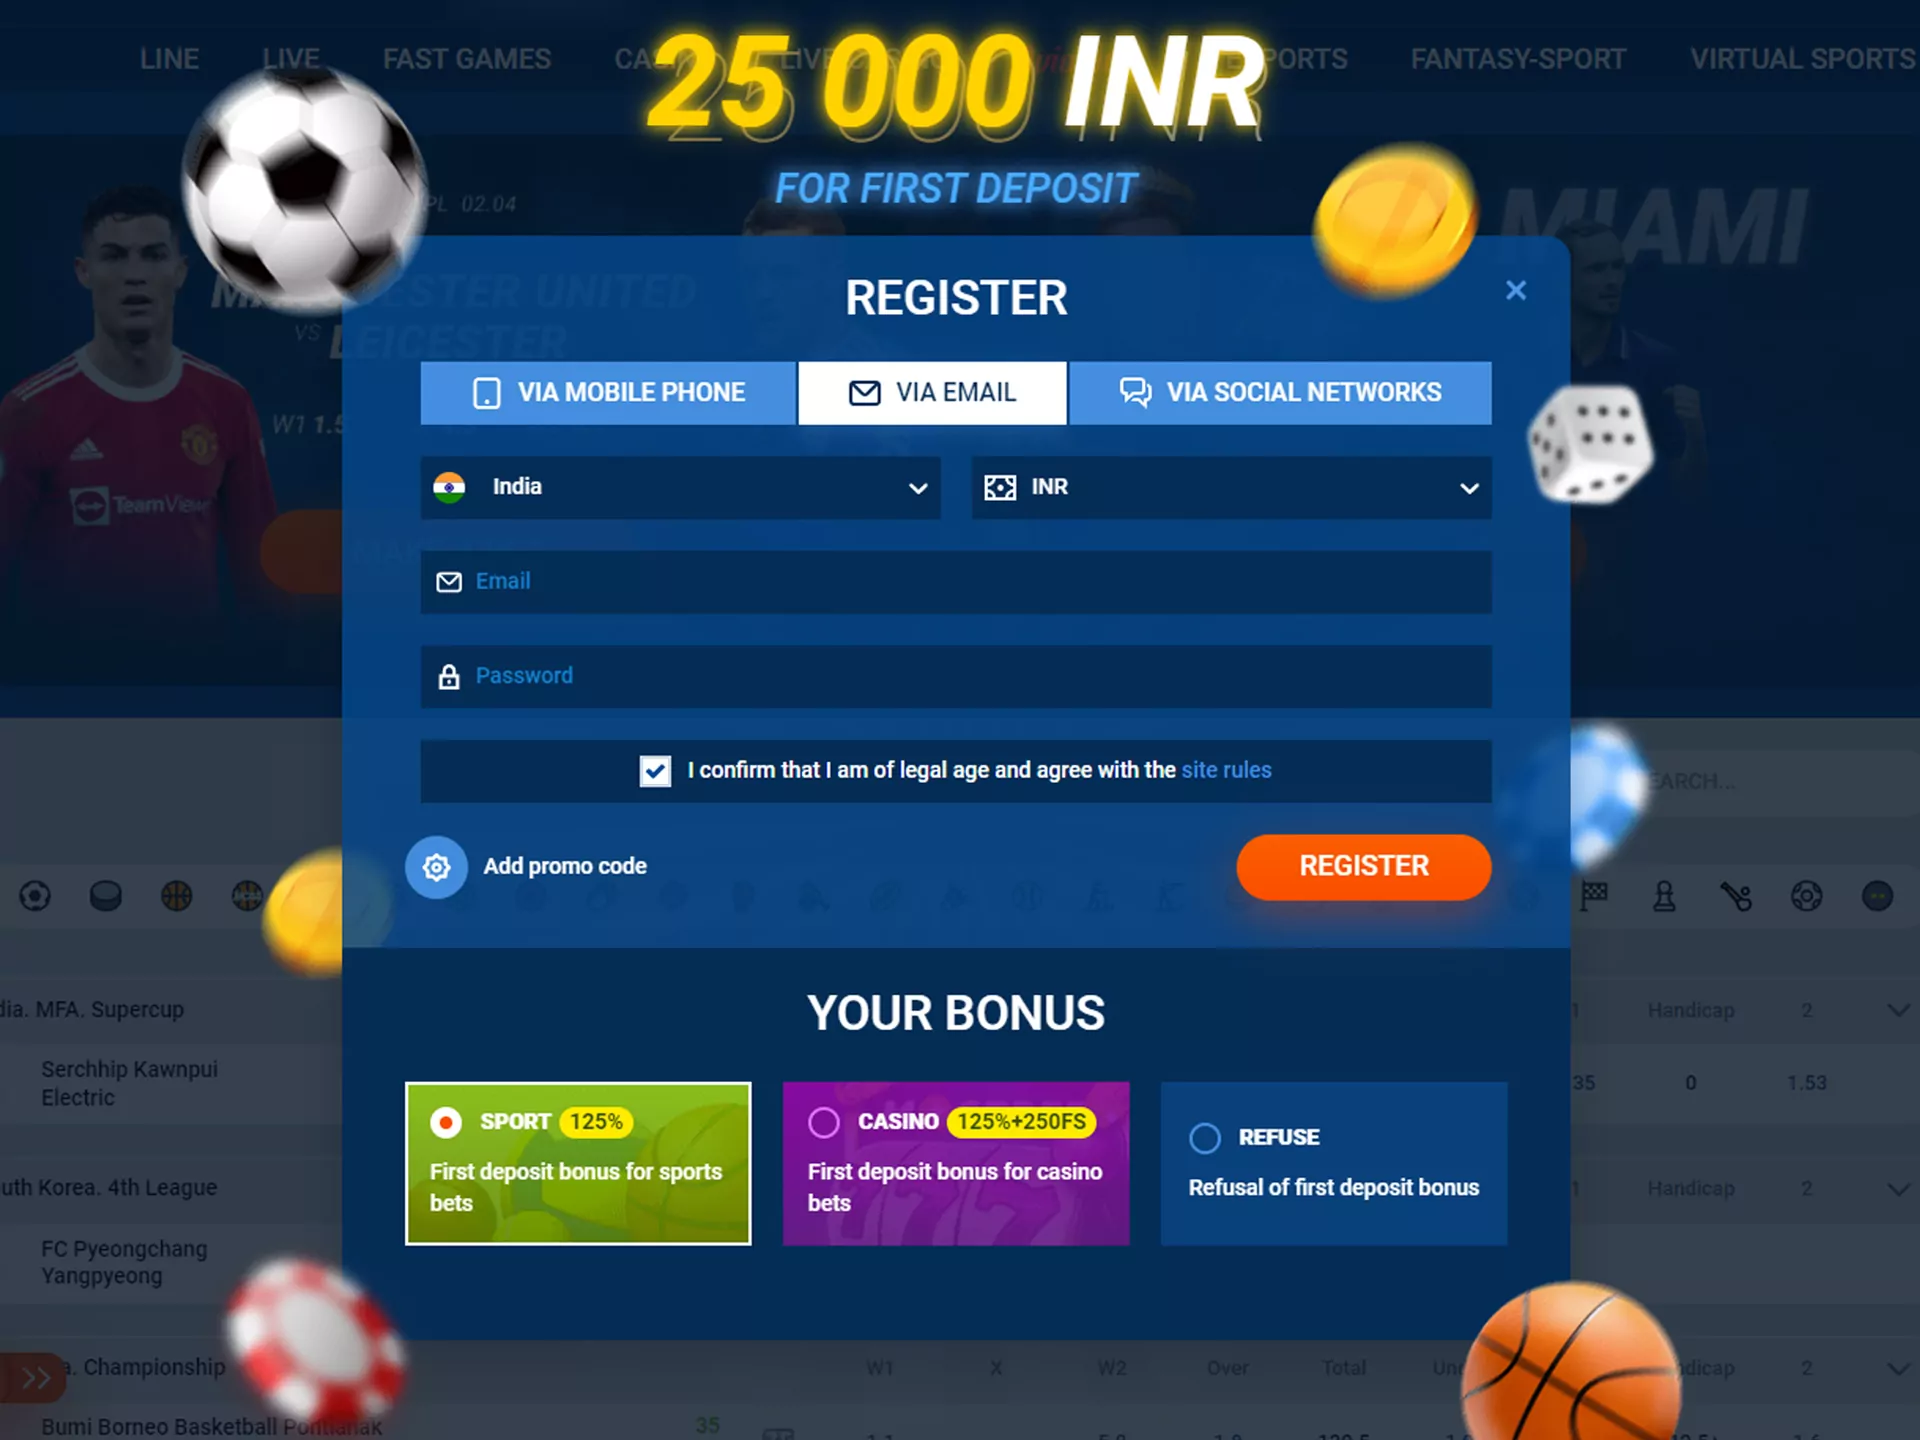 Registration on Mostbet is very easy.